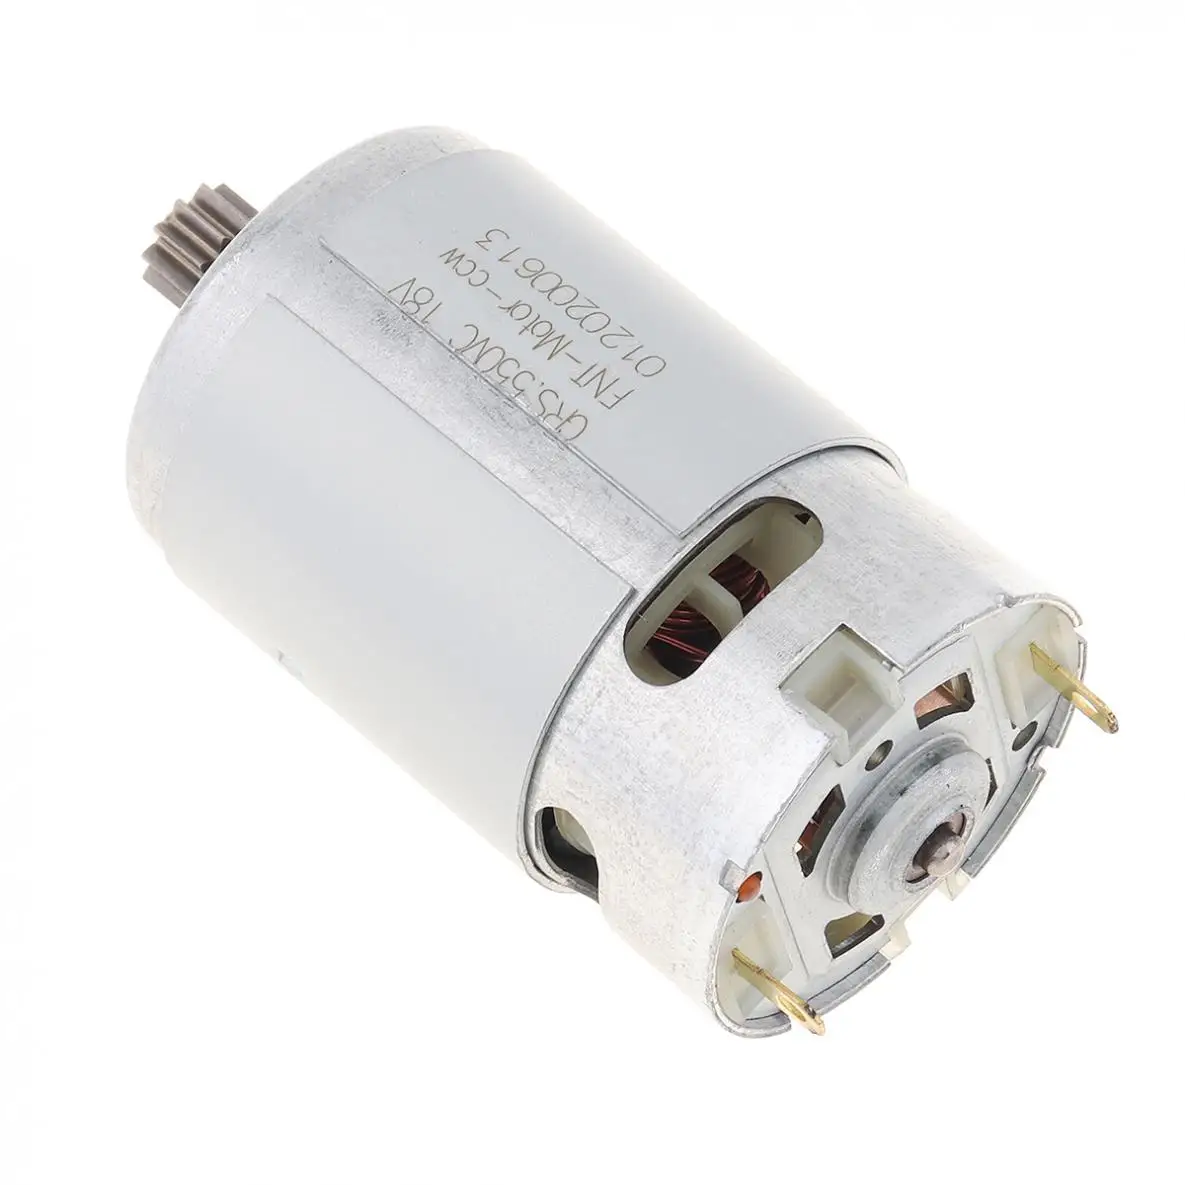 RS550 10.8/12/14.4/16.8/18V 27500rpm DC Motor with Two-speed 11 Teeth High  Torque Gears Box for Electric Drill/Screwdriver